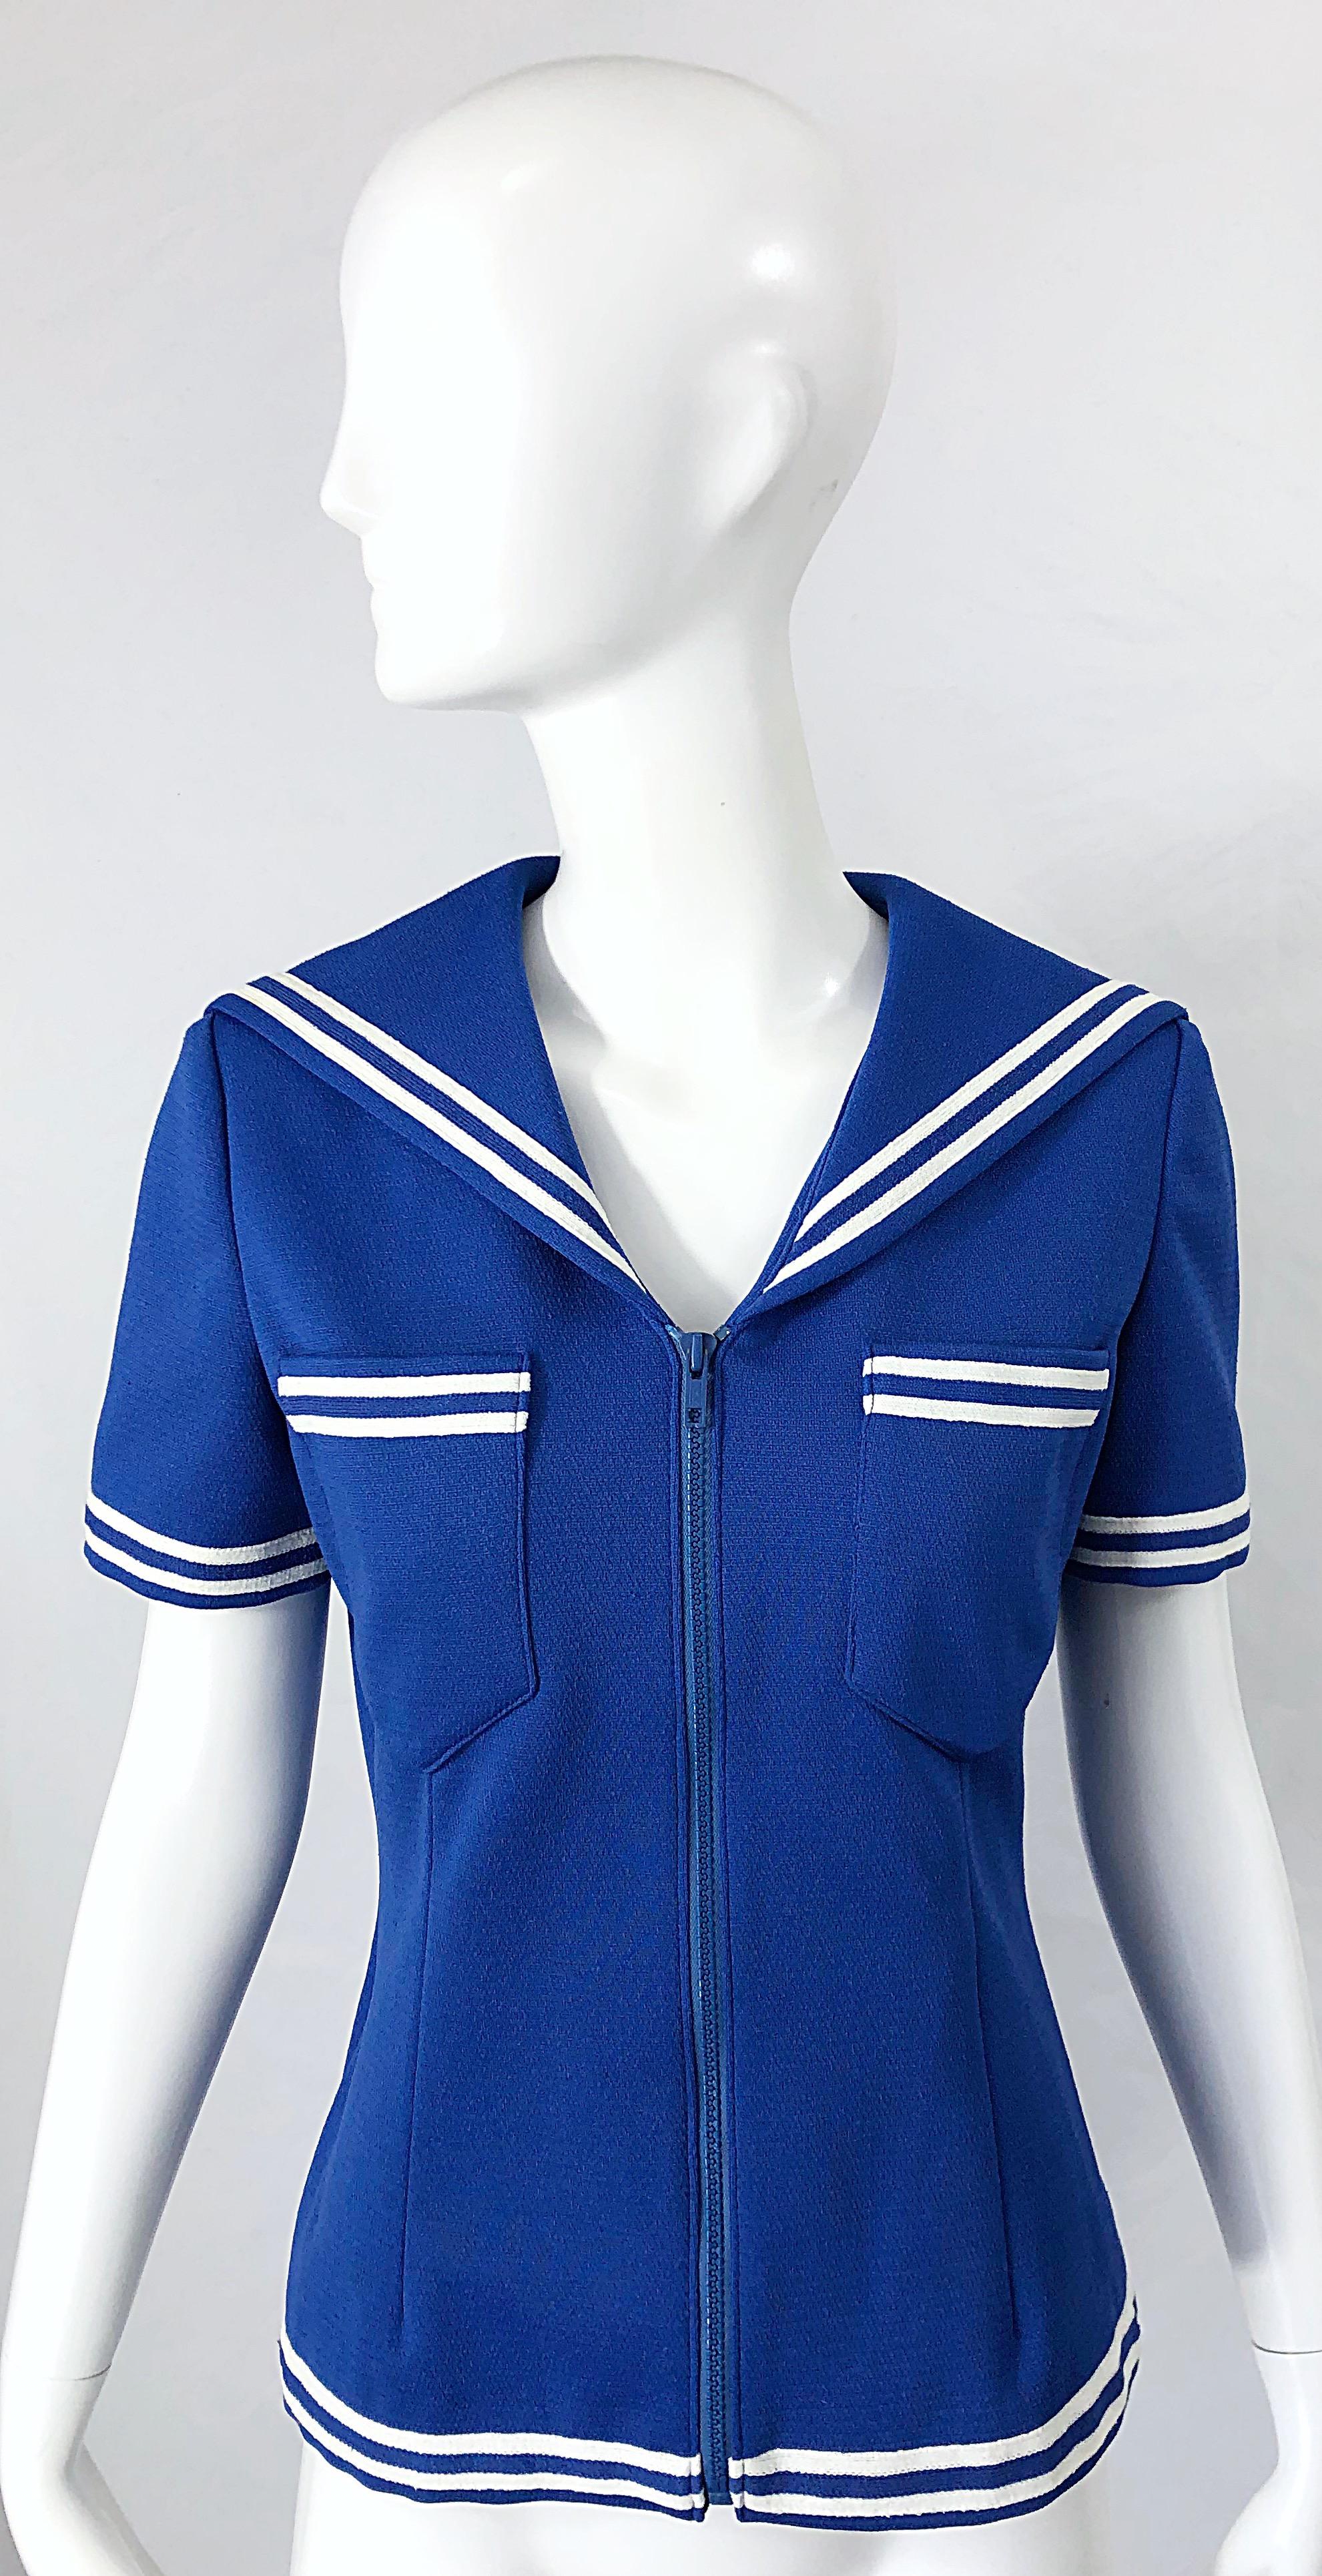 Chic 1970s blue and white knit nautical shirt! Features a soft knit that has some stretch. Full zipper up the front. Pockets at each breast. Would look fantastic with white trousers or short. In great condition
Made in USA
Approximately Size